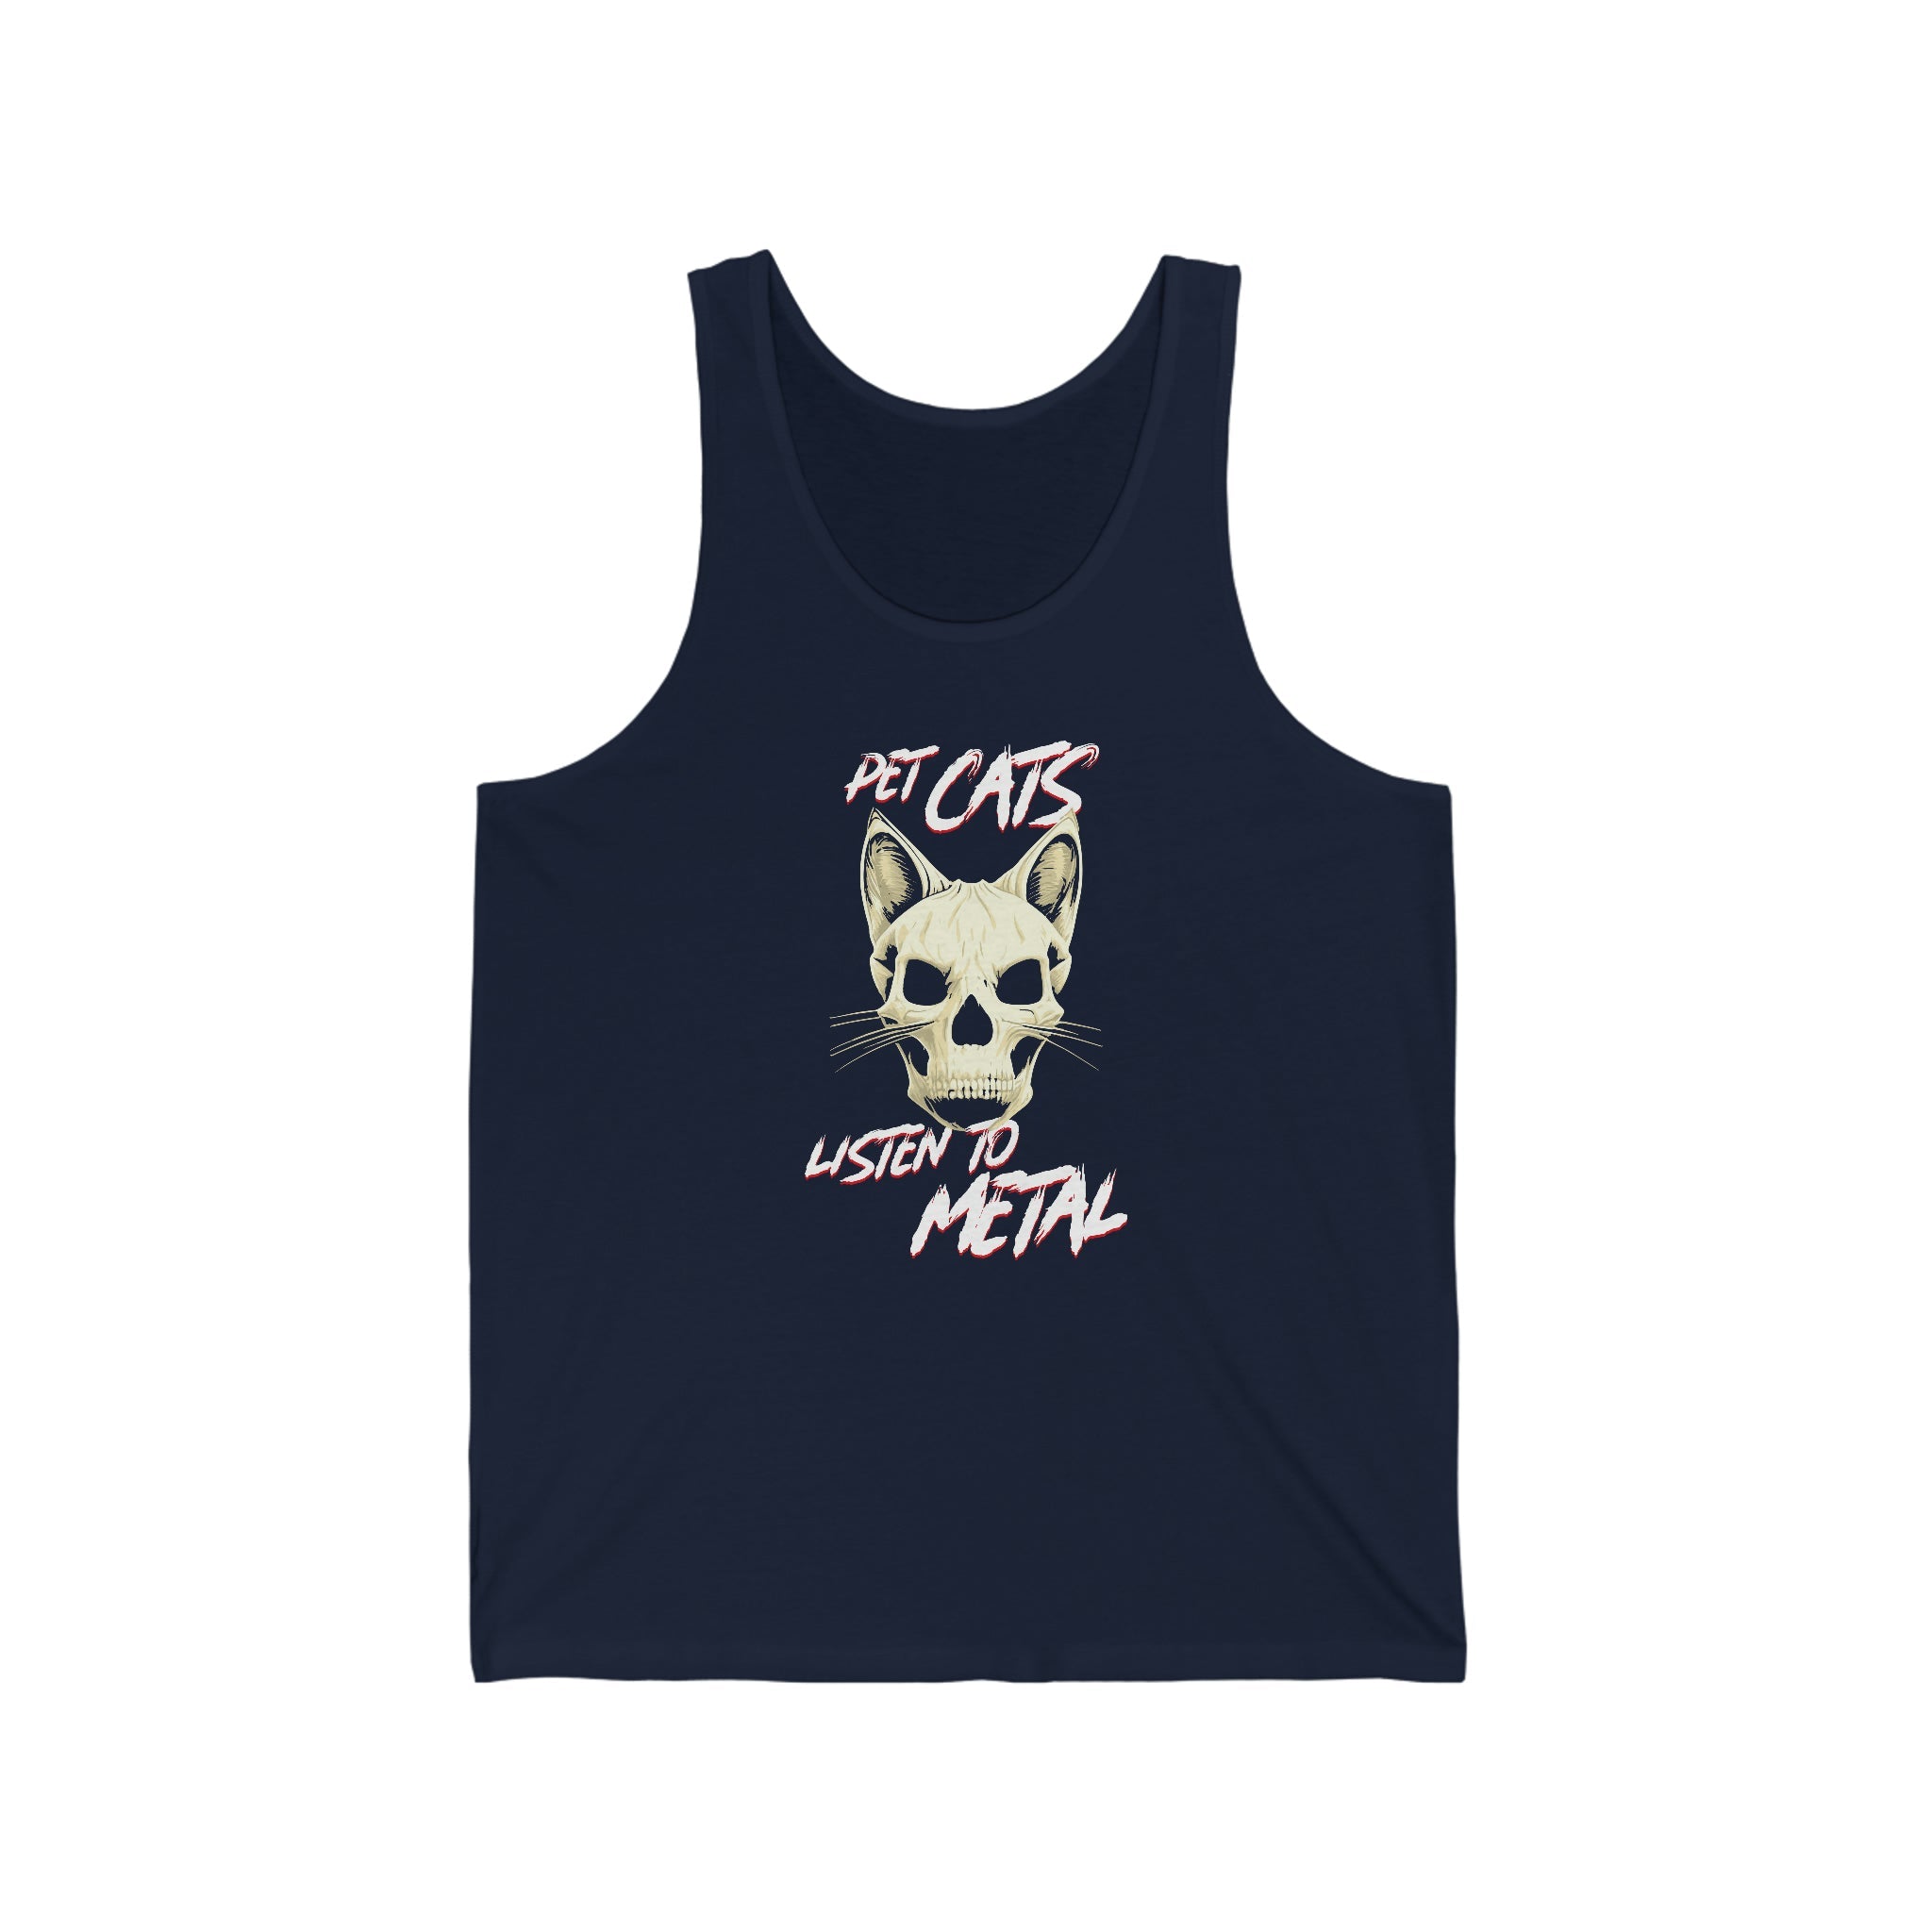 Pet Cats Listen to Metal : Unisex 100% Cotton Tank Top - Double Sided!!